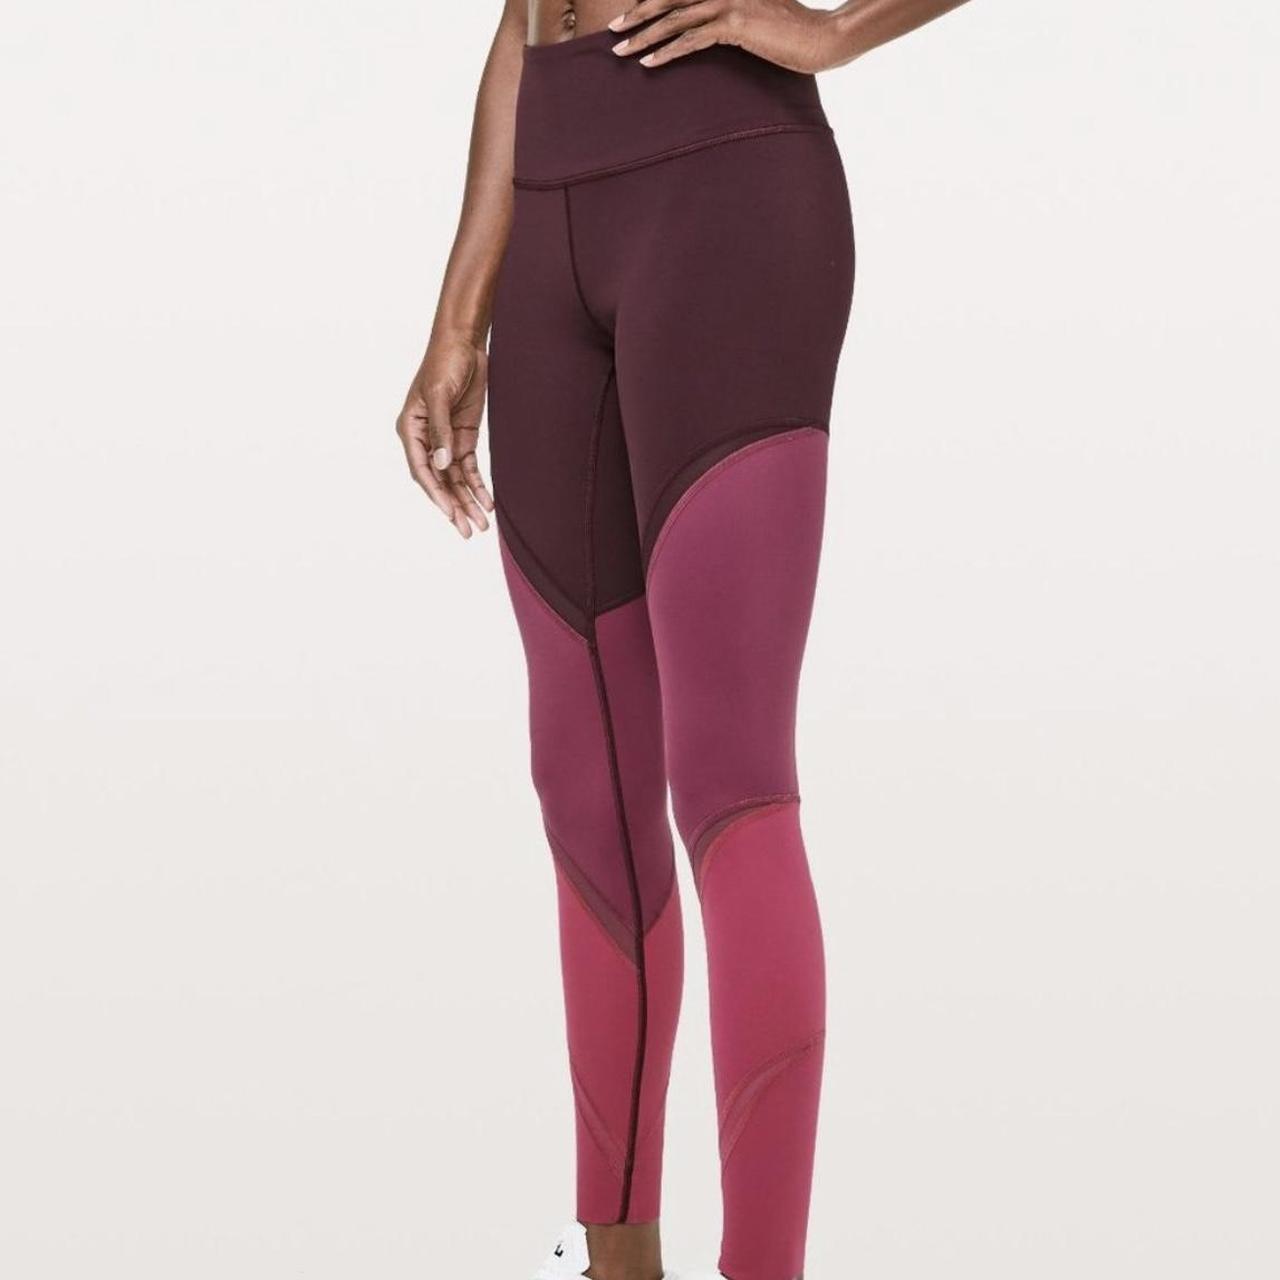 Lululemon athletica Colour Me ombre tight 28 - Athletic apparel